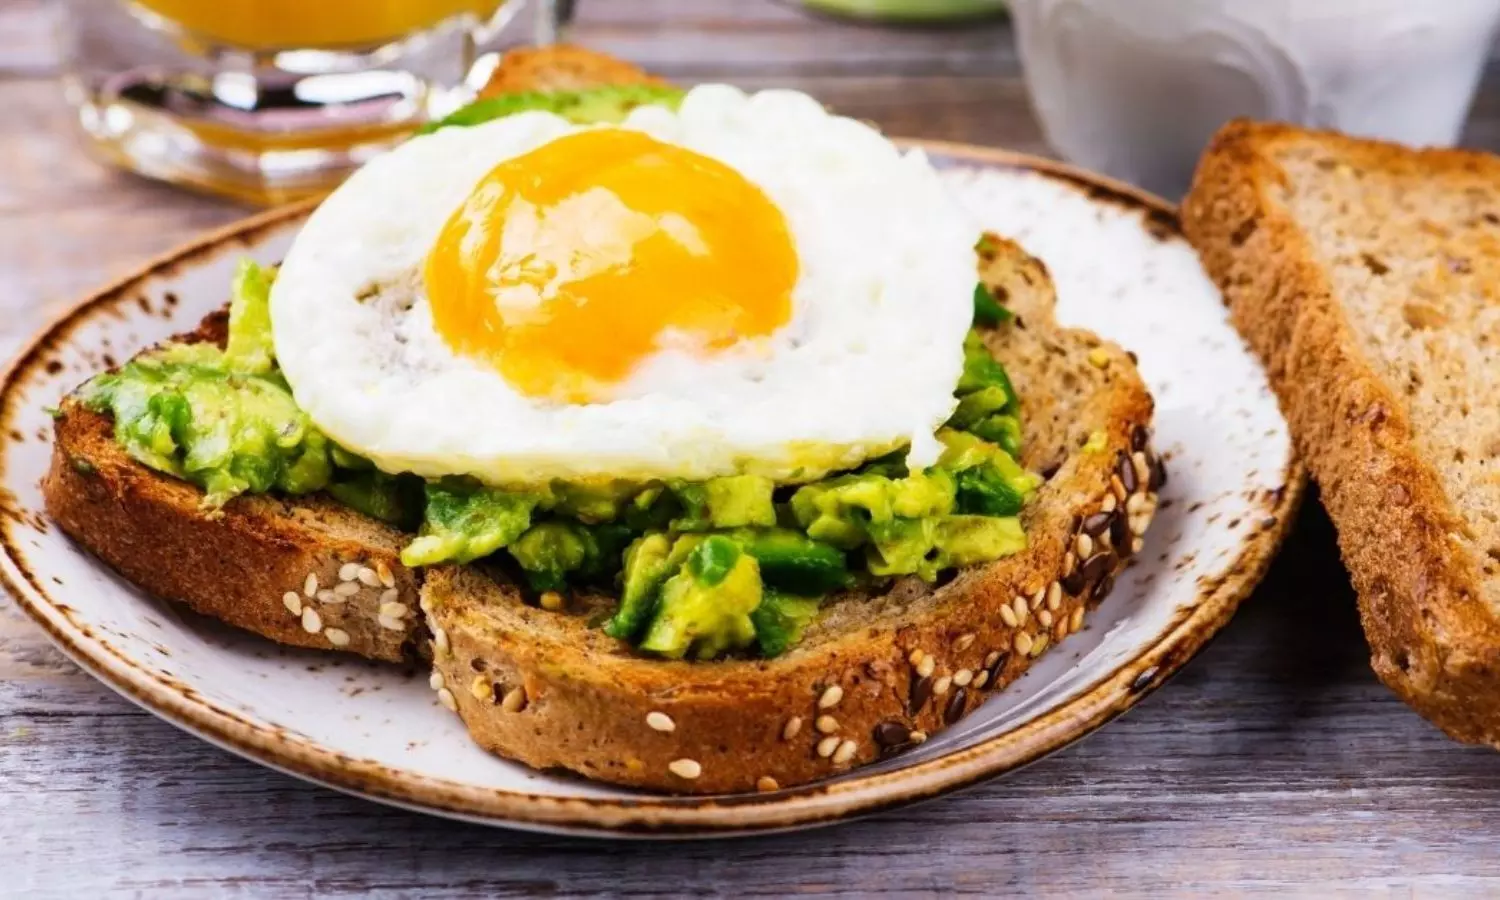 High protein breakfast with lunch suppresses postprandial blood sugar after each meal